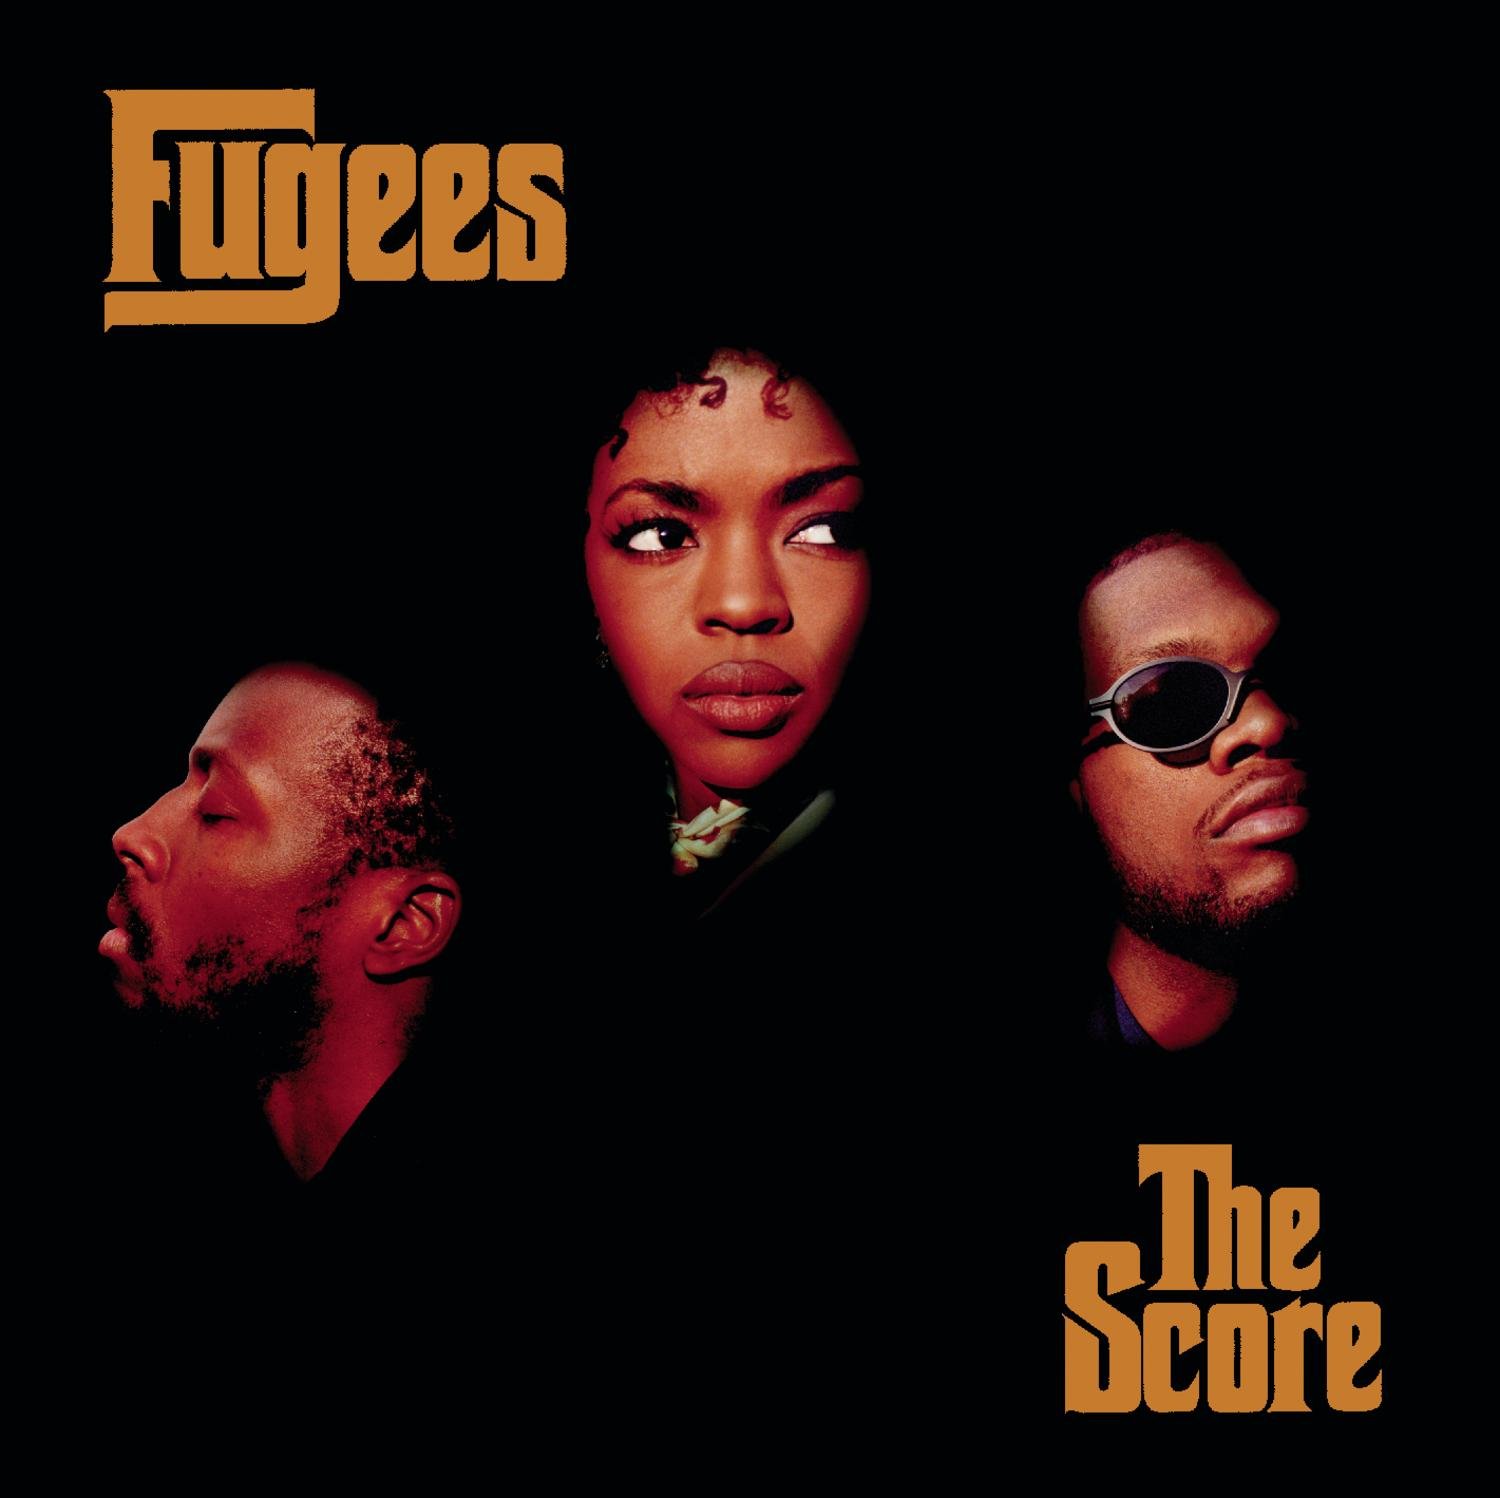 Fugees "The Score" 2LP